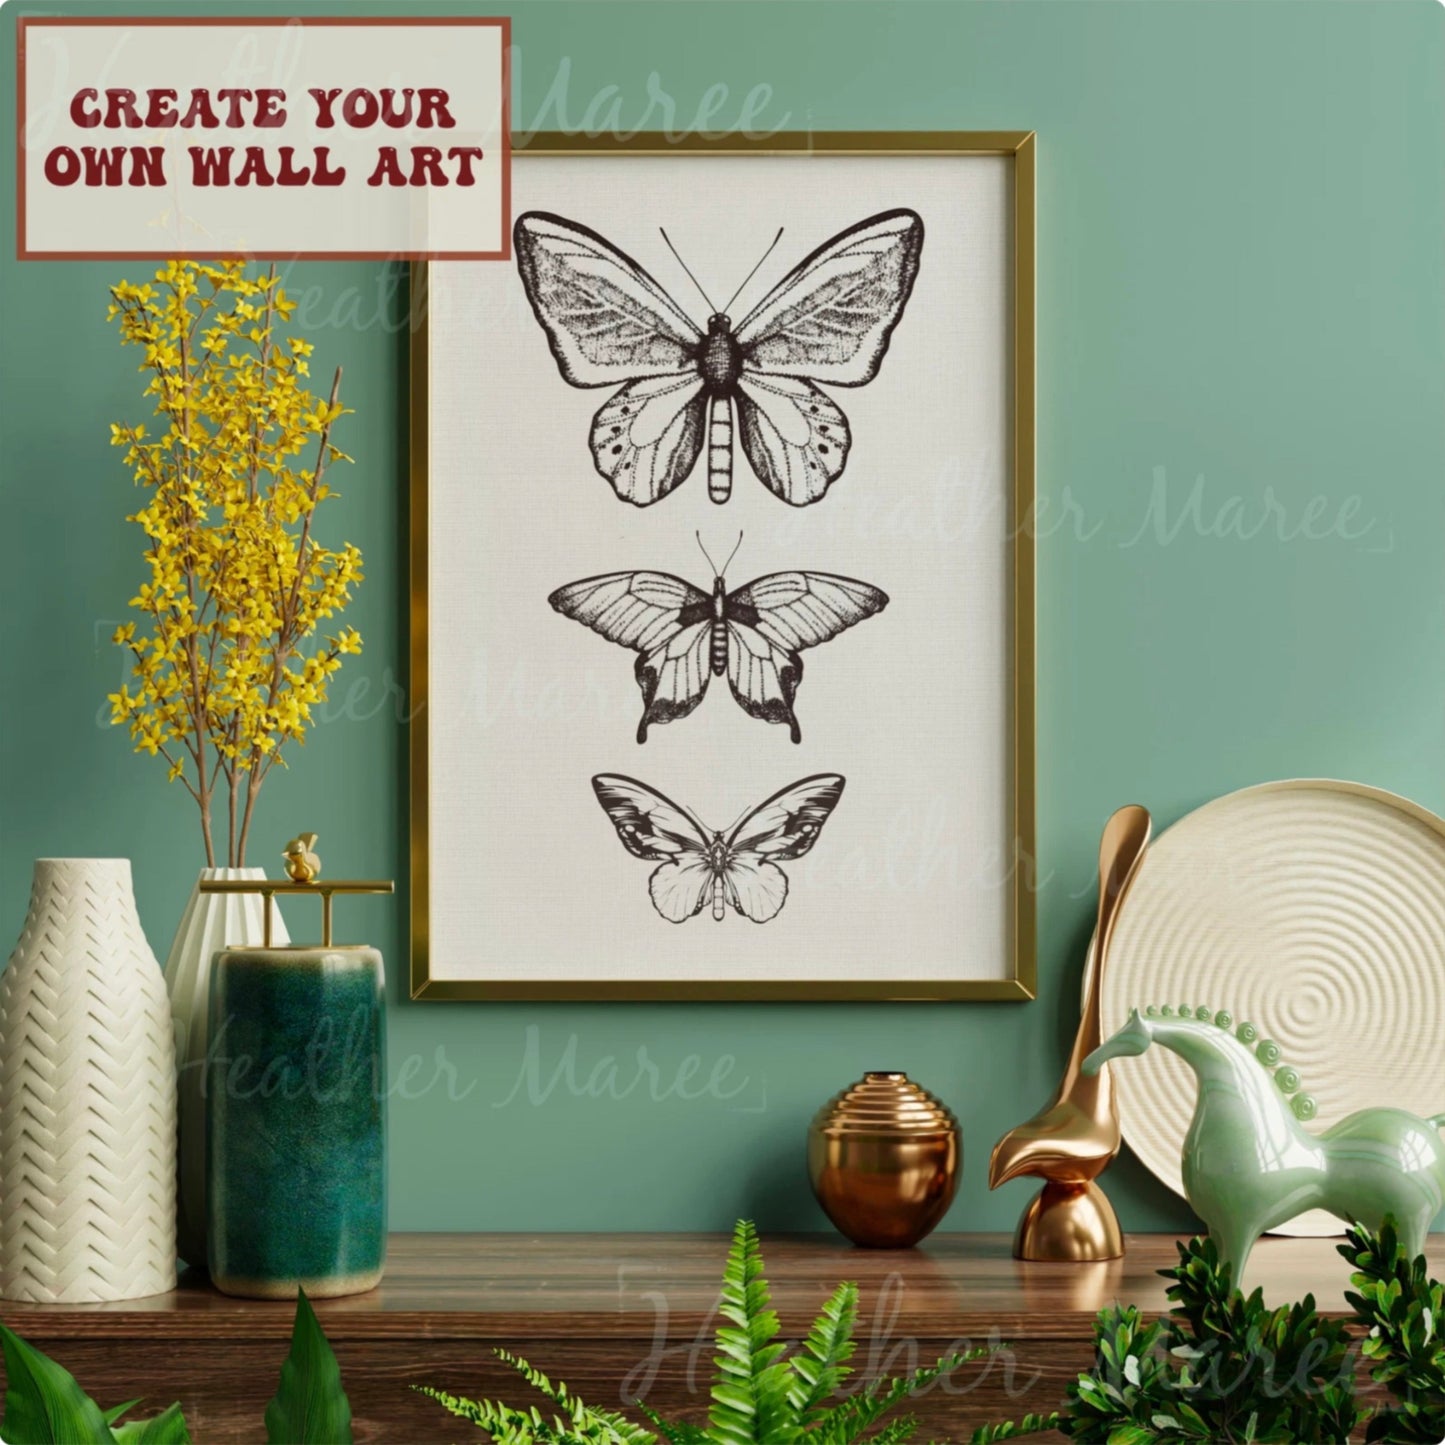 Butterflies and Moths | Procreate Stamp Brushes